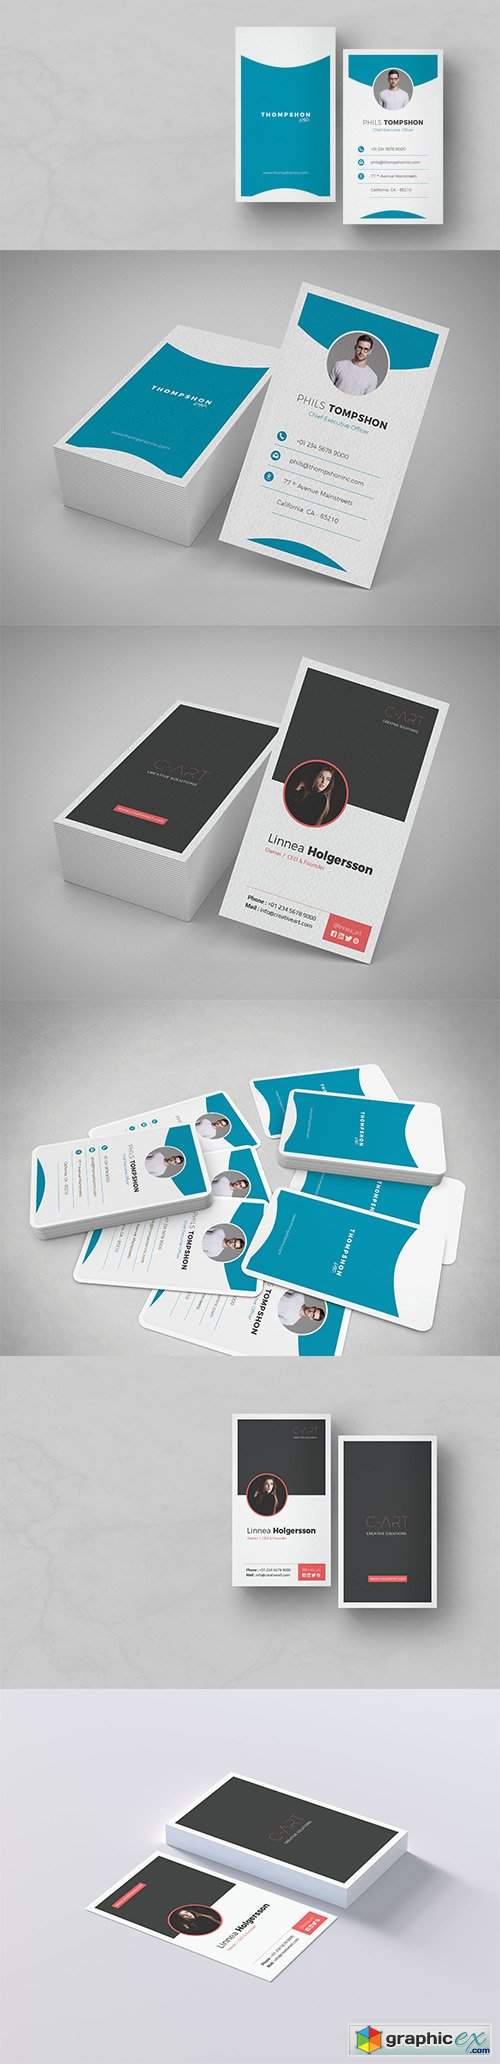 CodeSter - Professional Business Card Vol 02